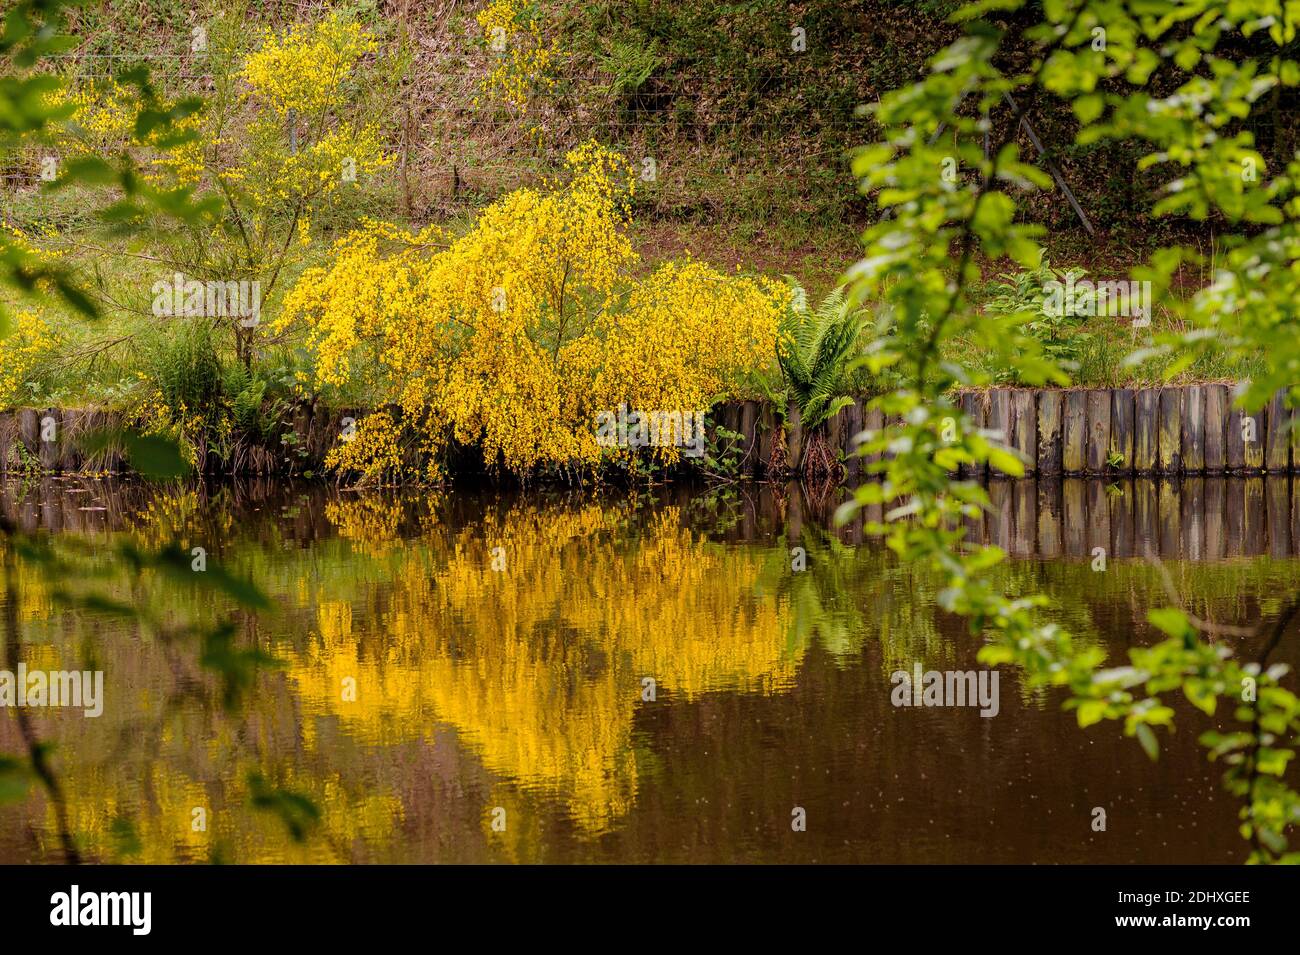 On the banks of a pond in Alsace, France. The yellow flowers of a broom are reflected in the water. Stock Photo